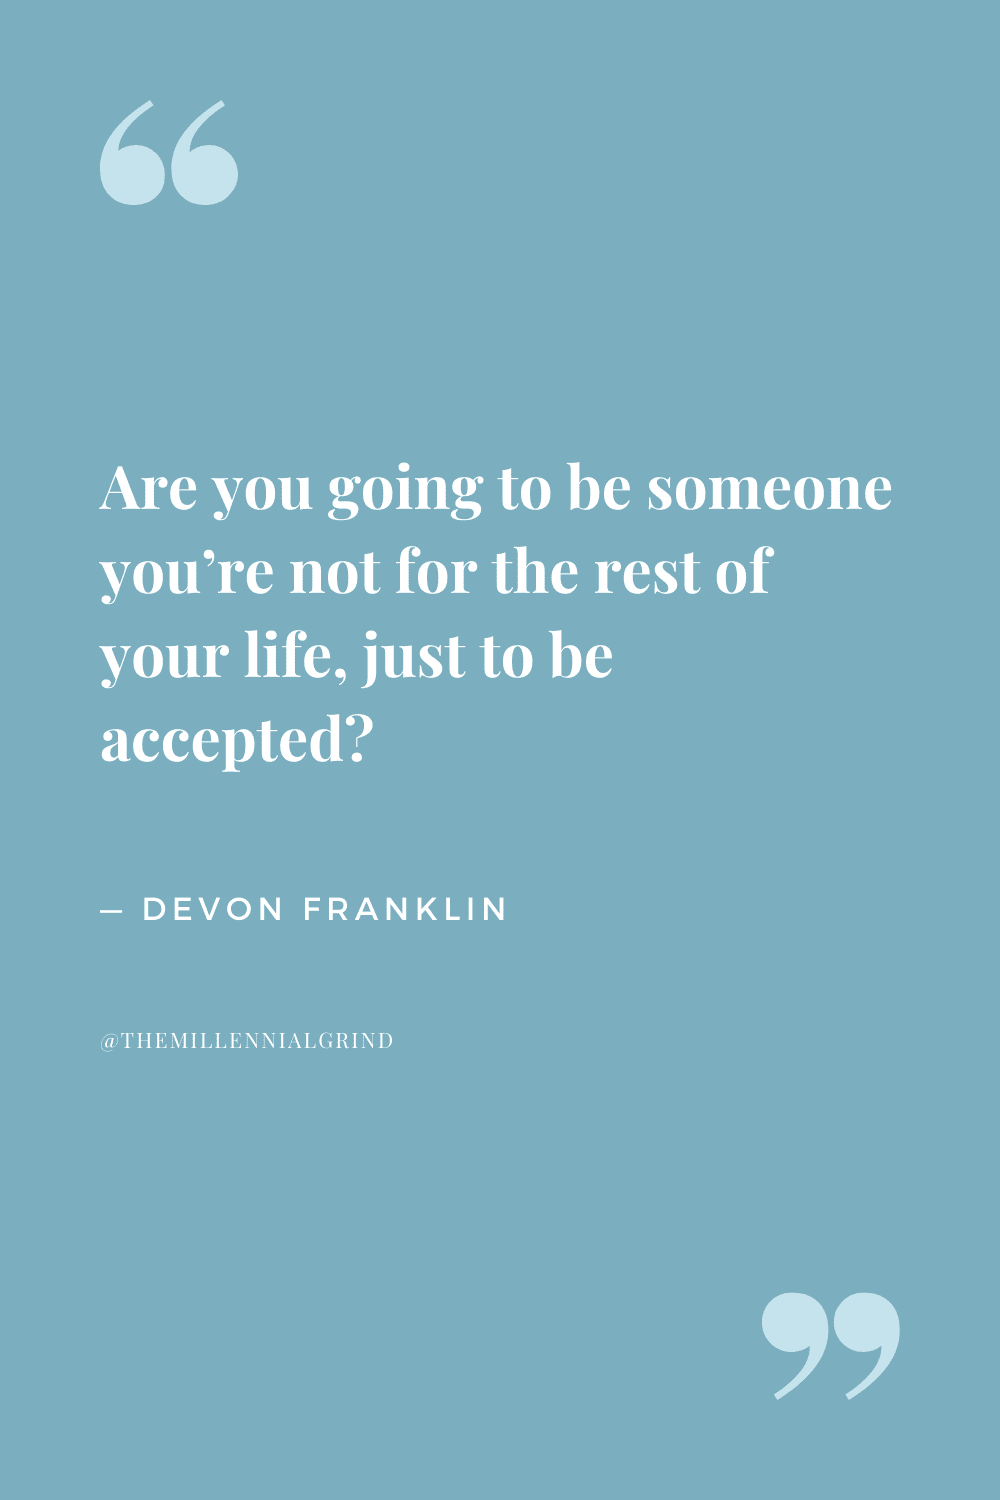 Quotes from Live Free by DeVon Franklin